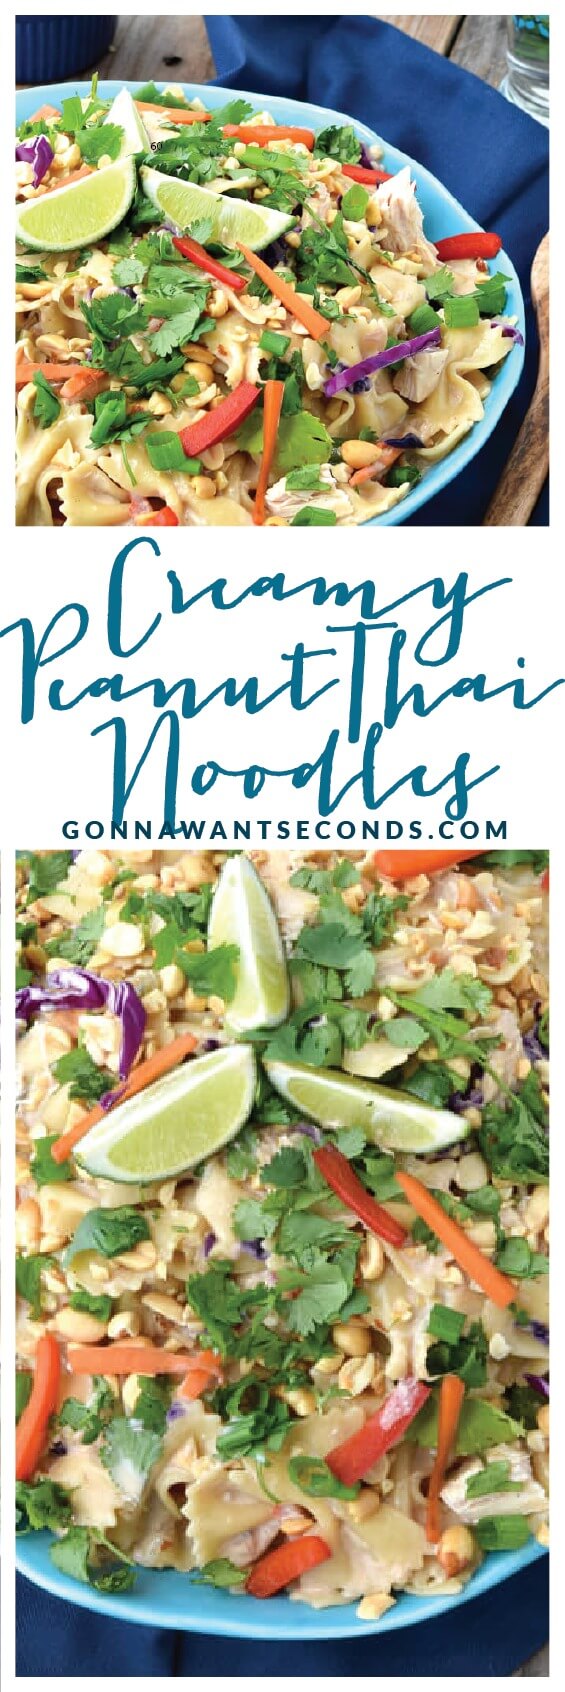 Creamy Peanut Thai Noodles-This is my family's all-time favorite pasta dish. It's smothered in an amazing Thai inspired peanut sauce and loaded with chunks of chicken and lots of fresh, tender veggies. Everything is more delicious with peanut sauce! 